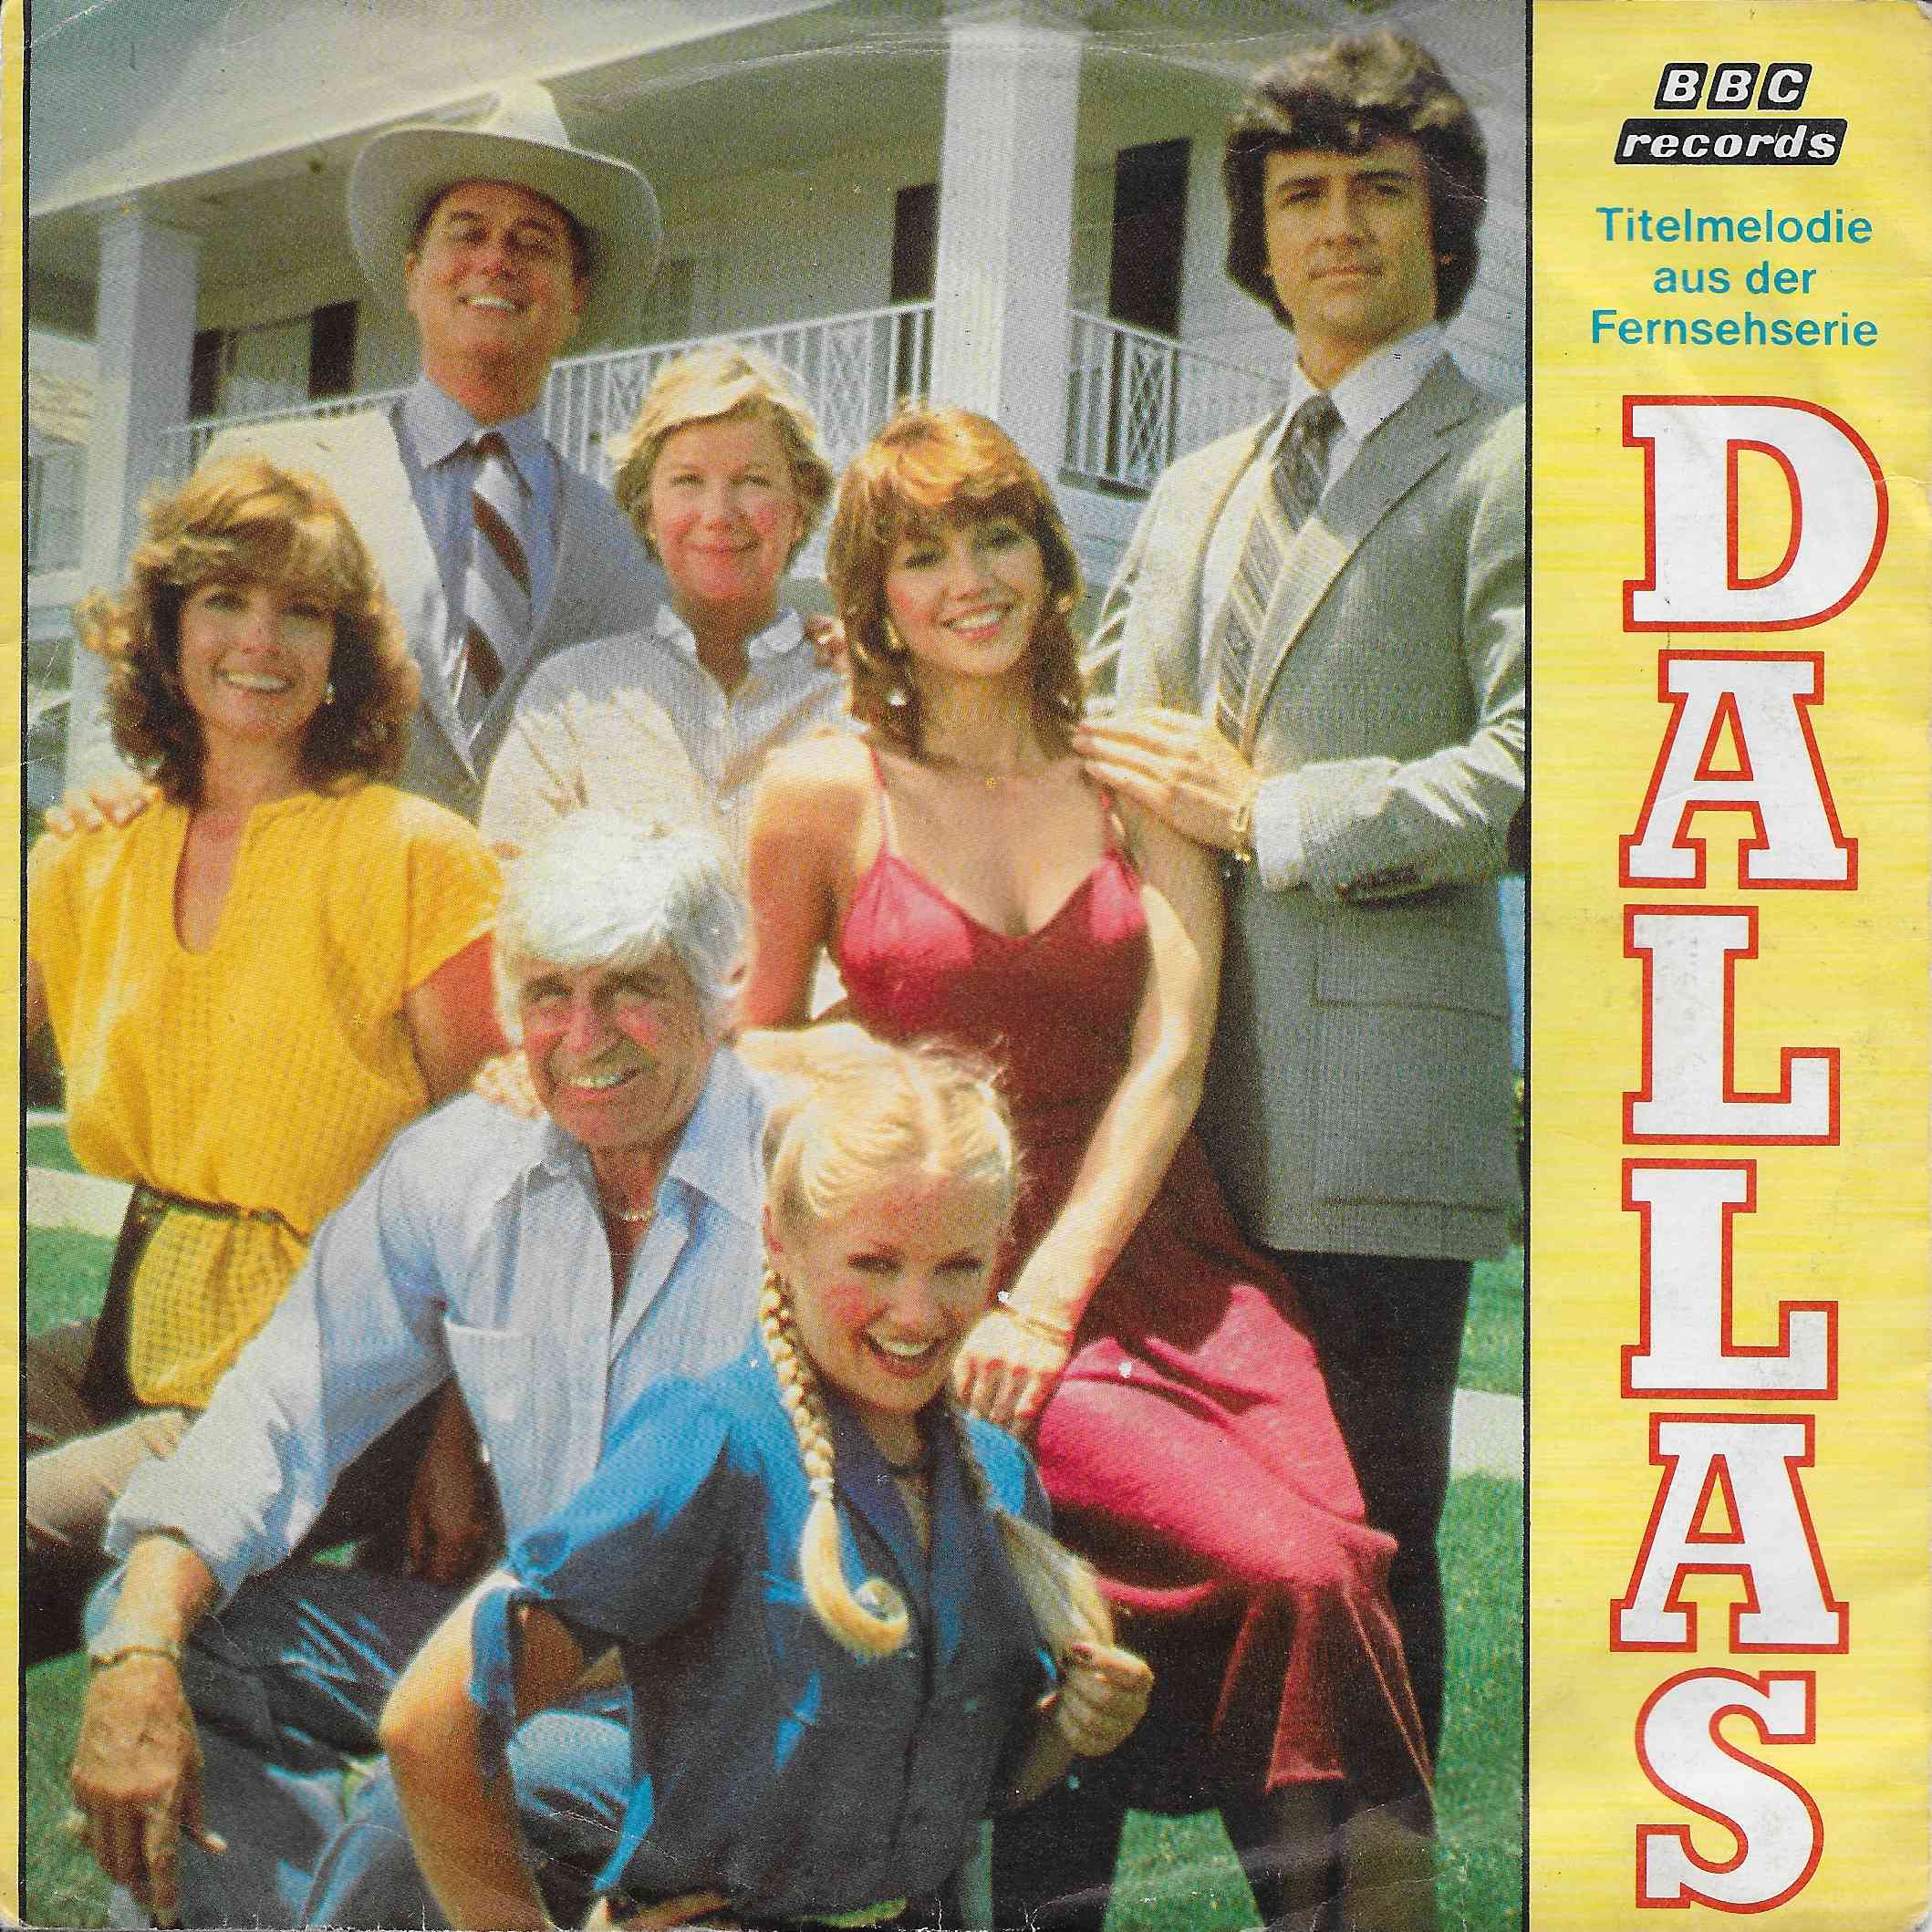 Picture of INT 113.007 Dallas by artist Jerrold Immel from the BBC records and Tapes library